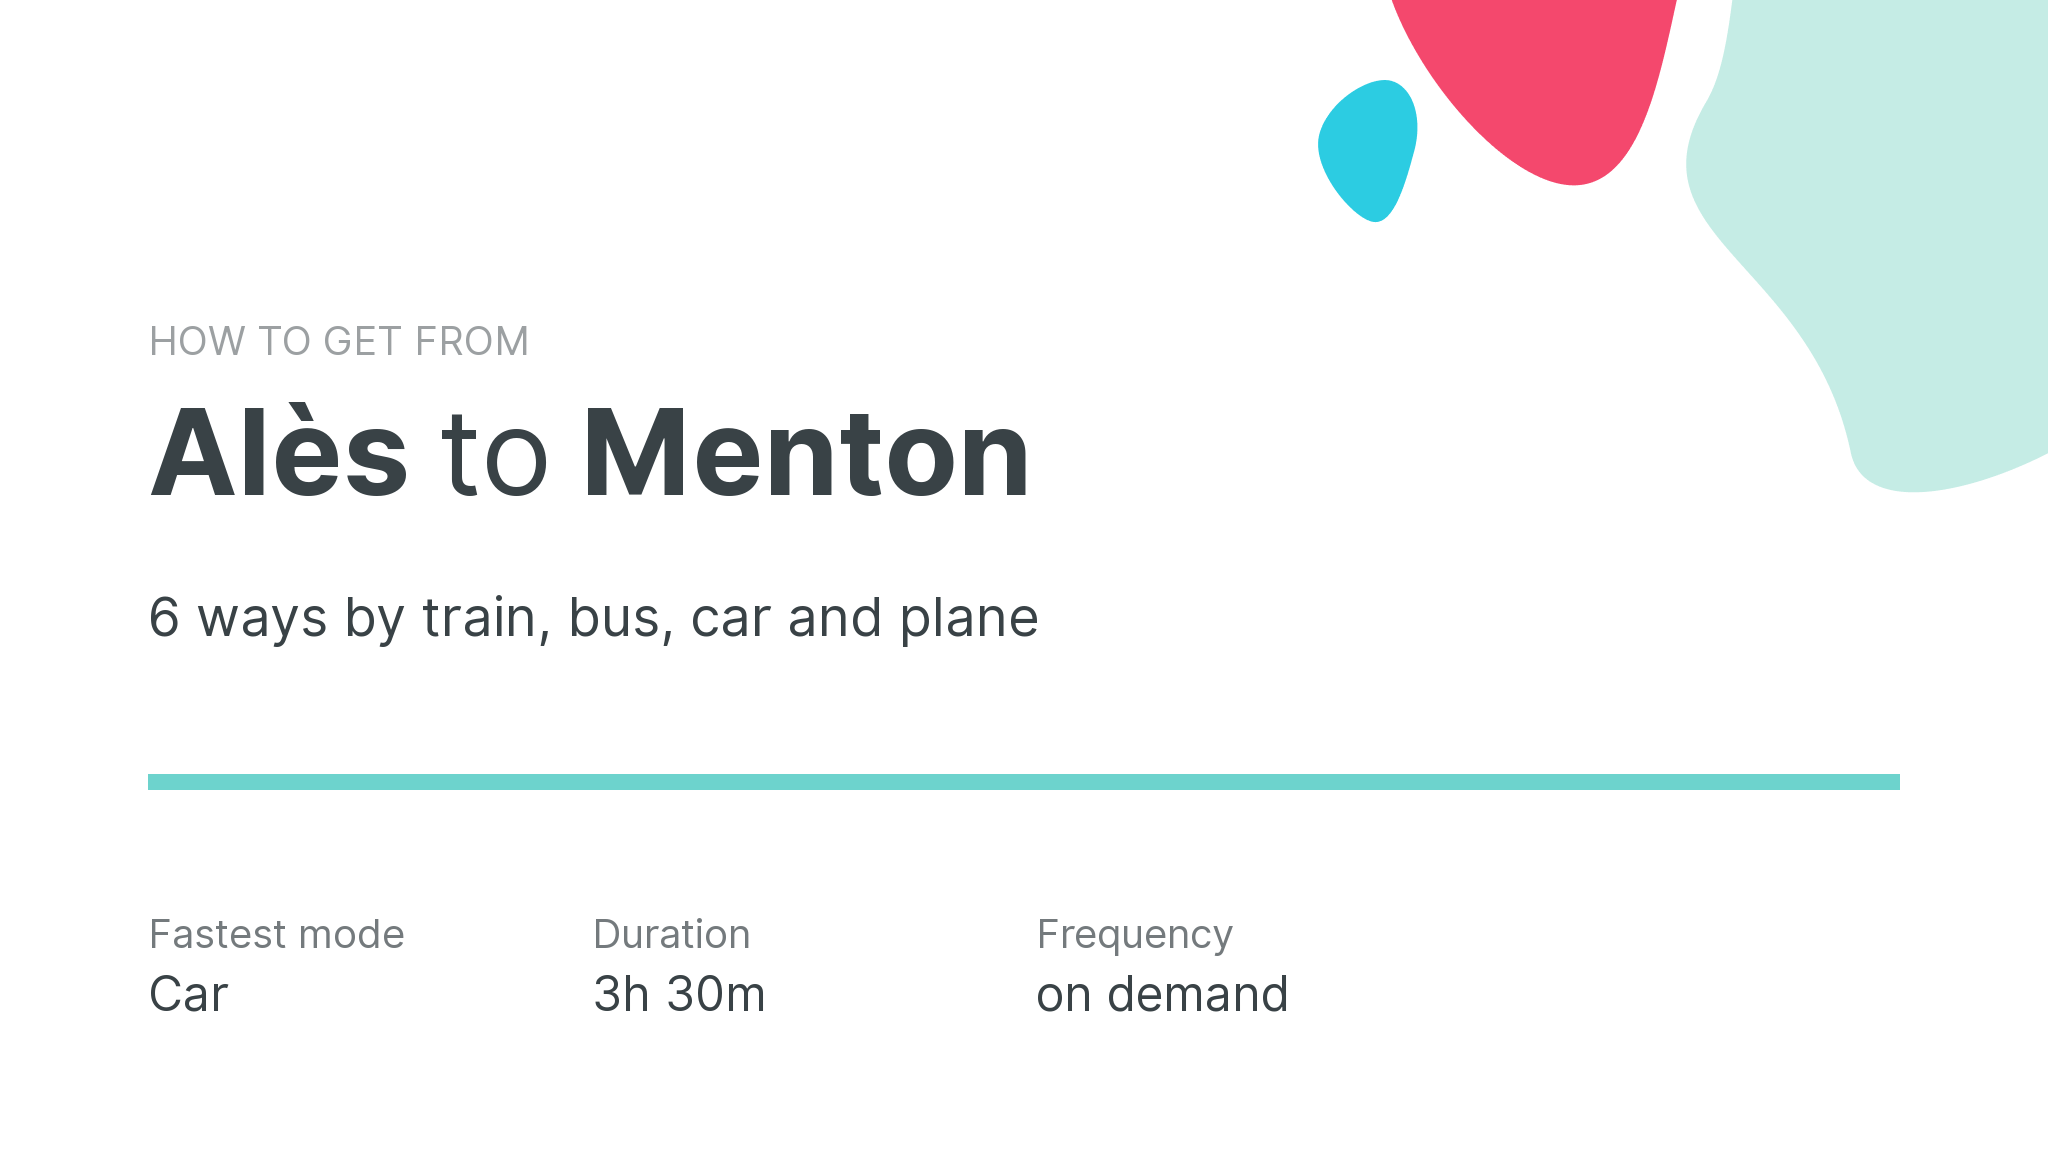 How do I get from Alès to Menton